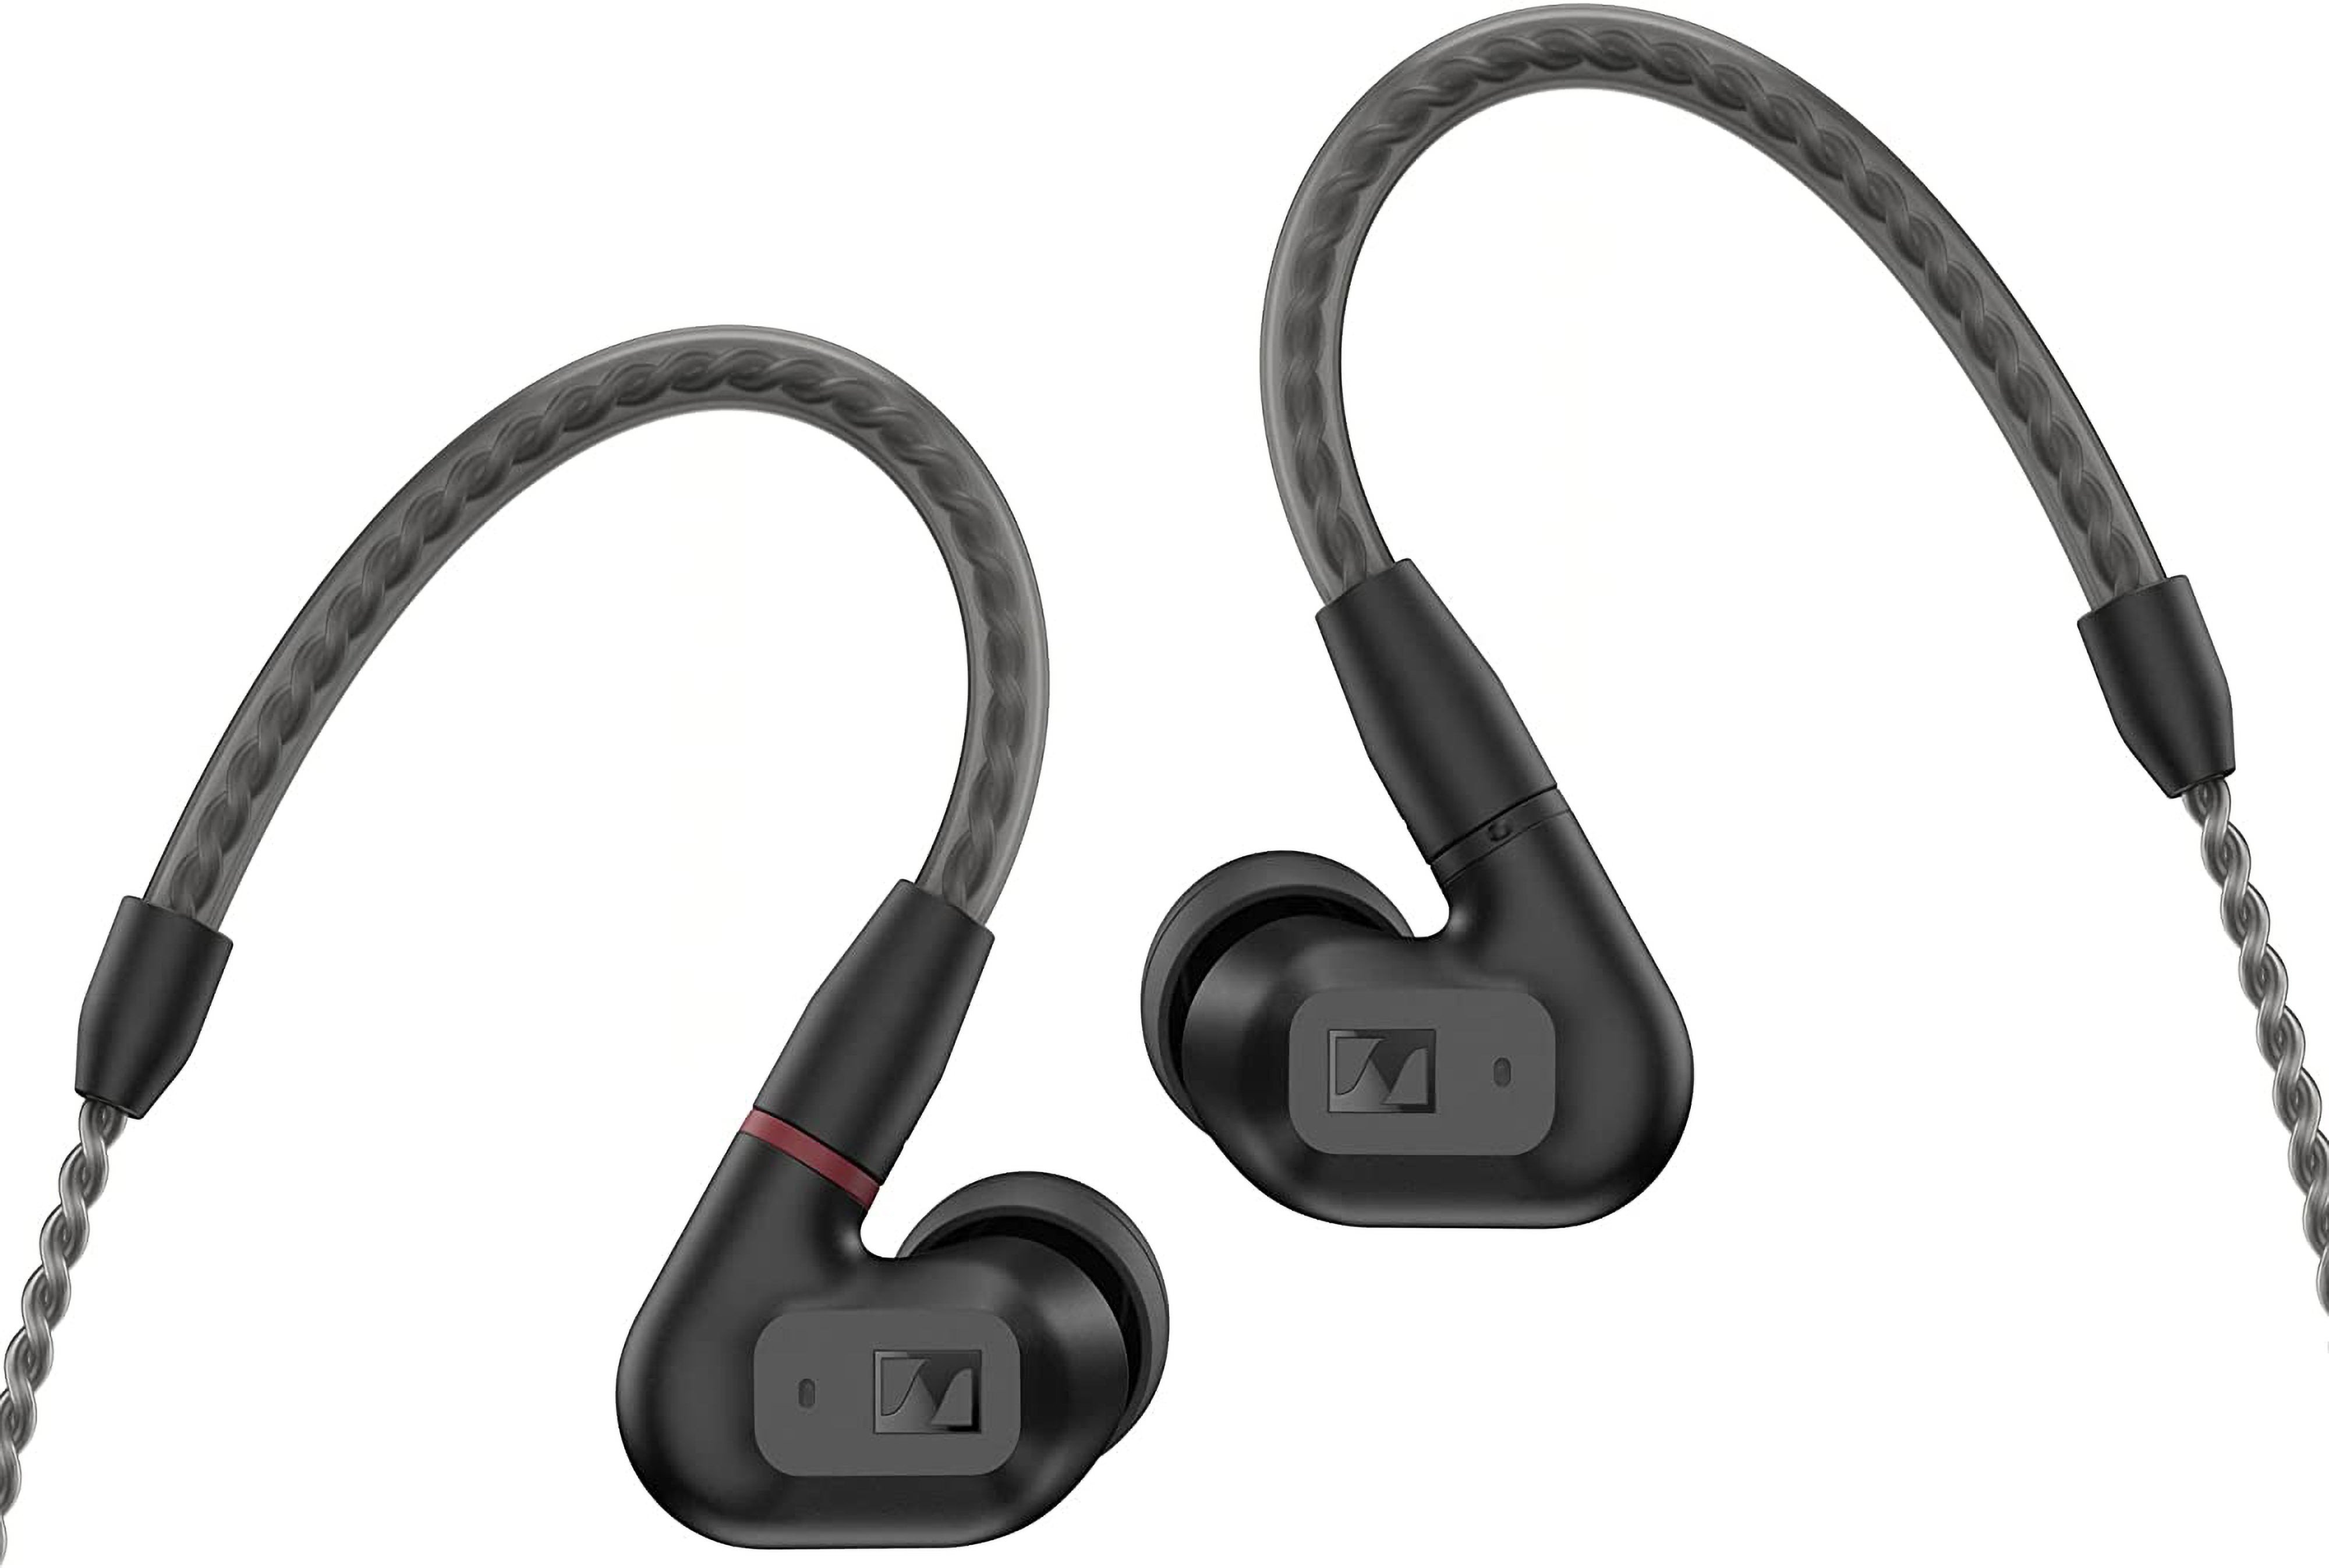 IE 200 High-Fidelity Audiophile Wired Earbuds